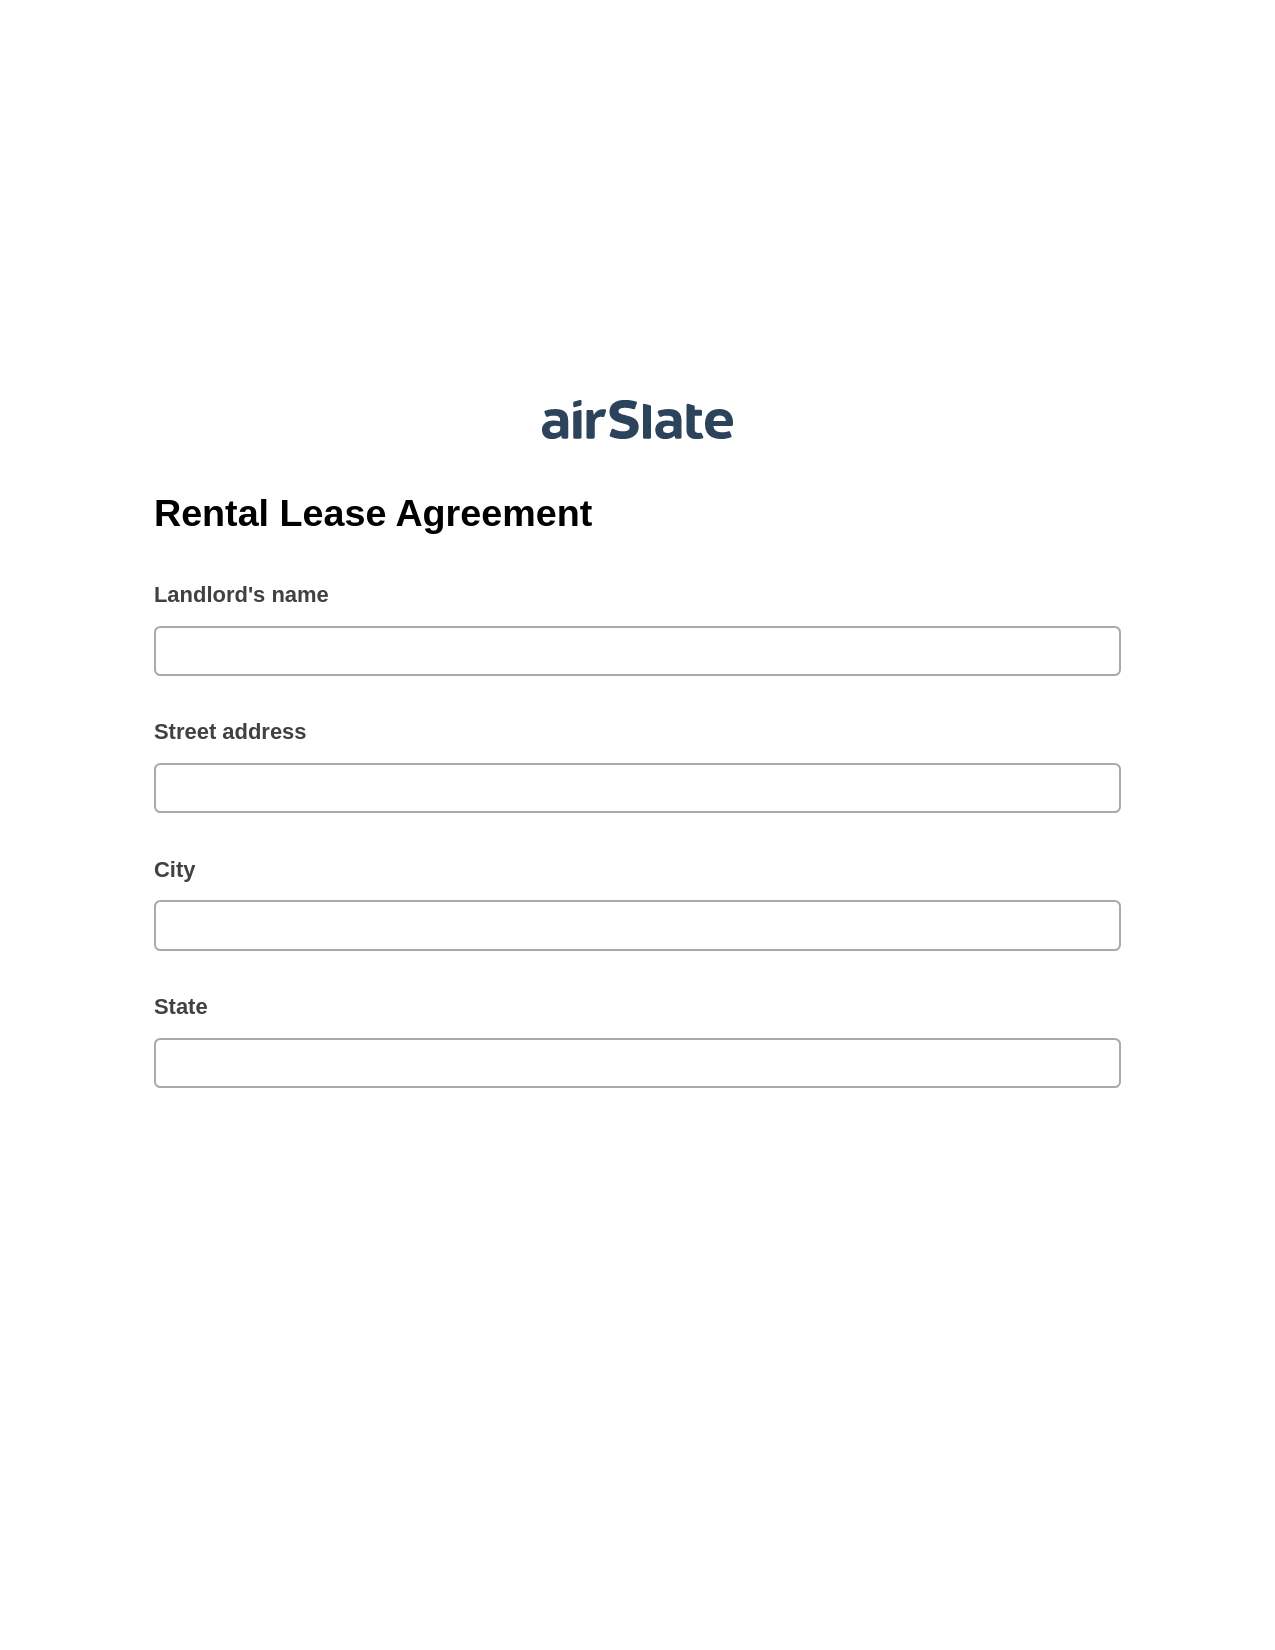 Rental Lease Agreement Pre-fill Dropdowns from Office 365 Excel Bot, Unassign Role Bot, Google Drive Bot